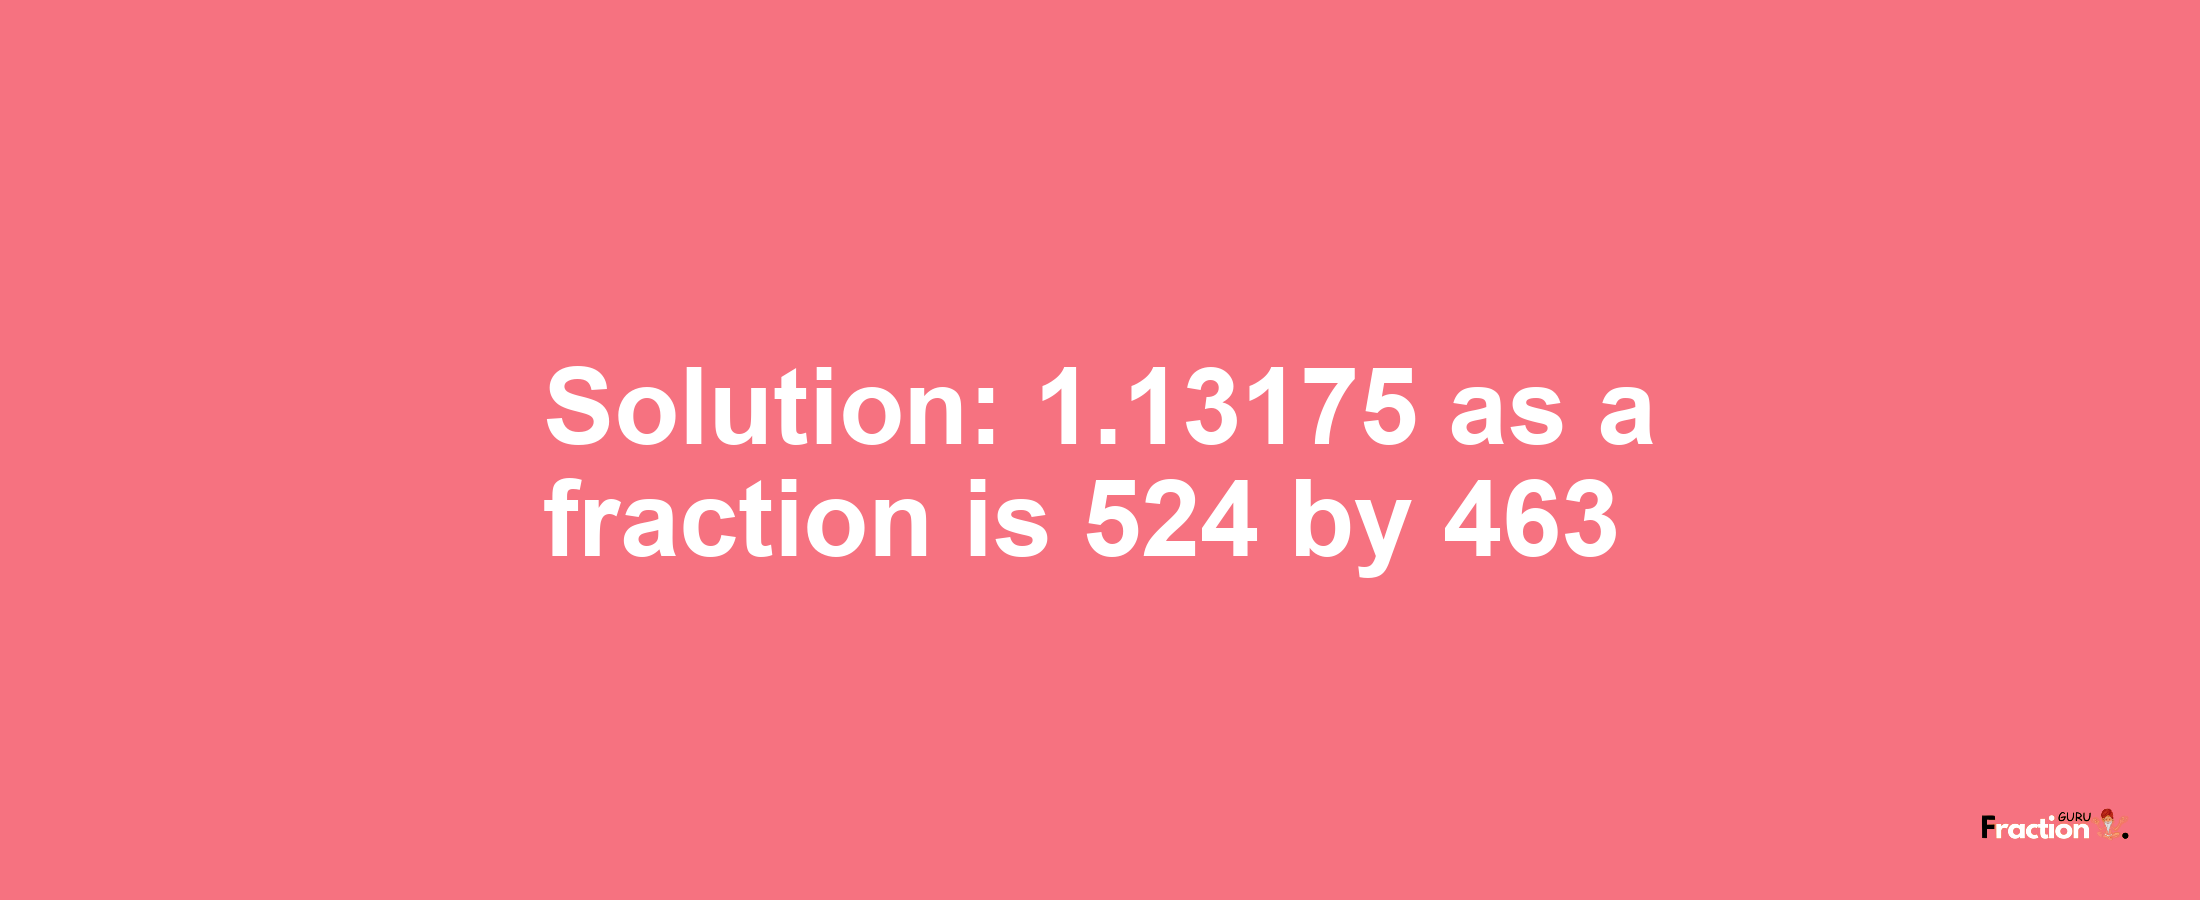 Solution:1.13175 as a fraction is 524/463